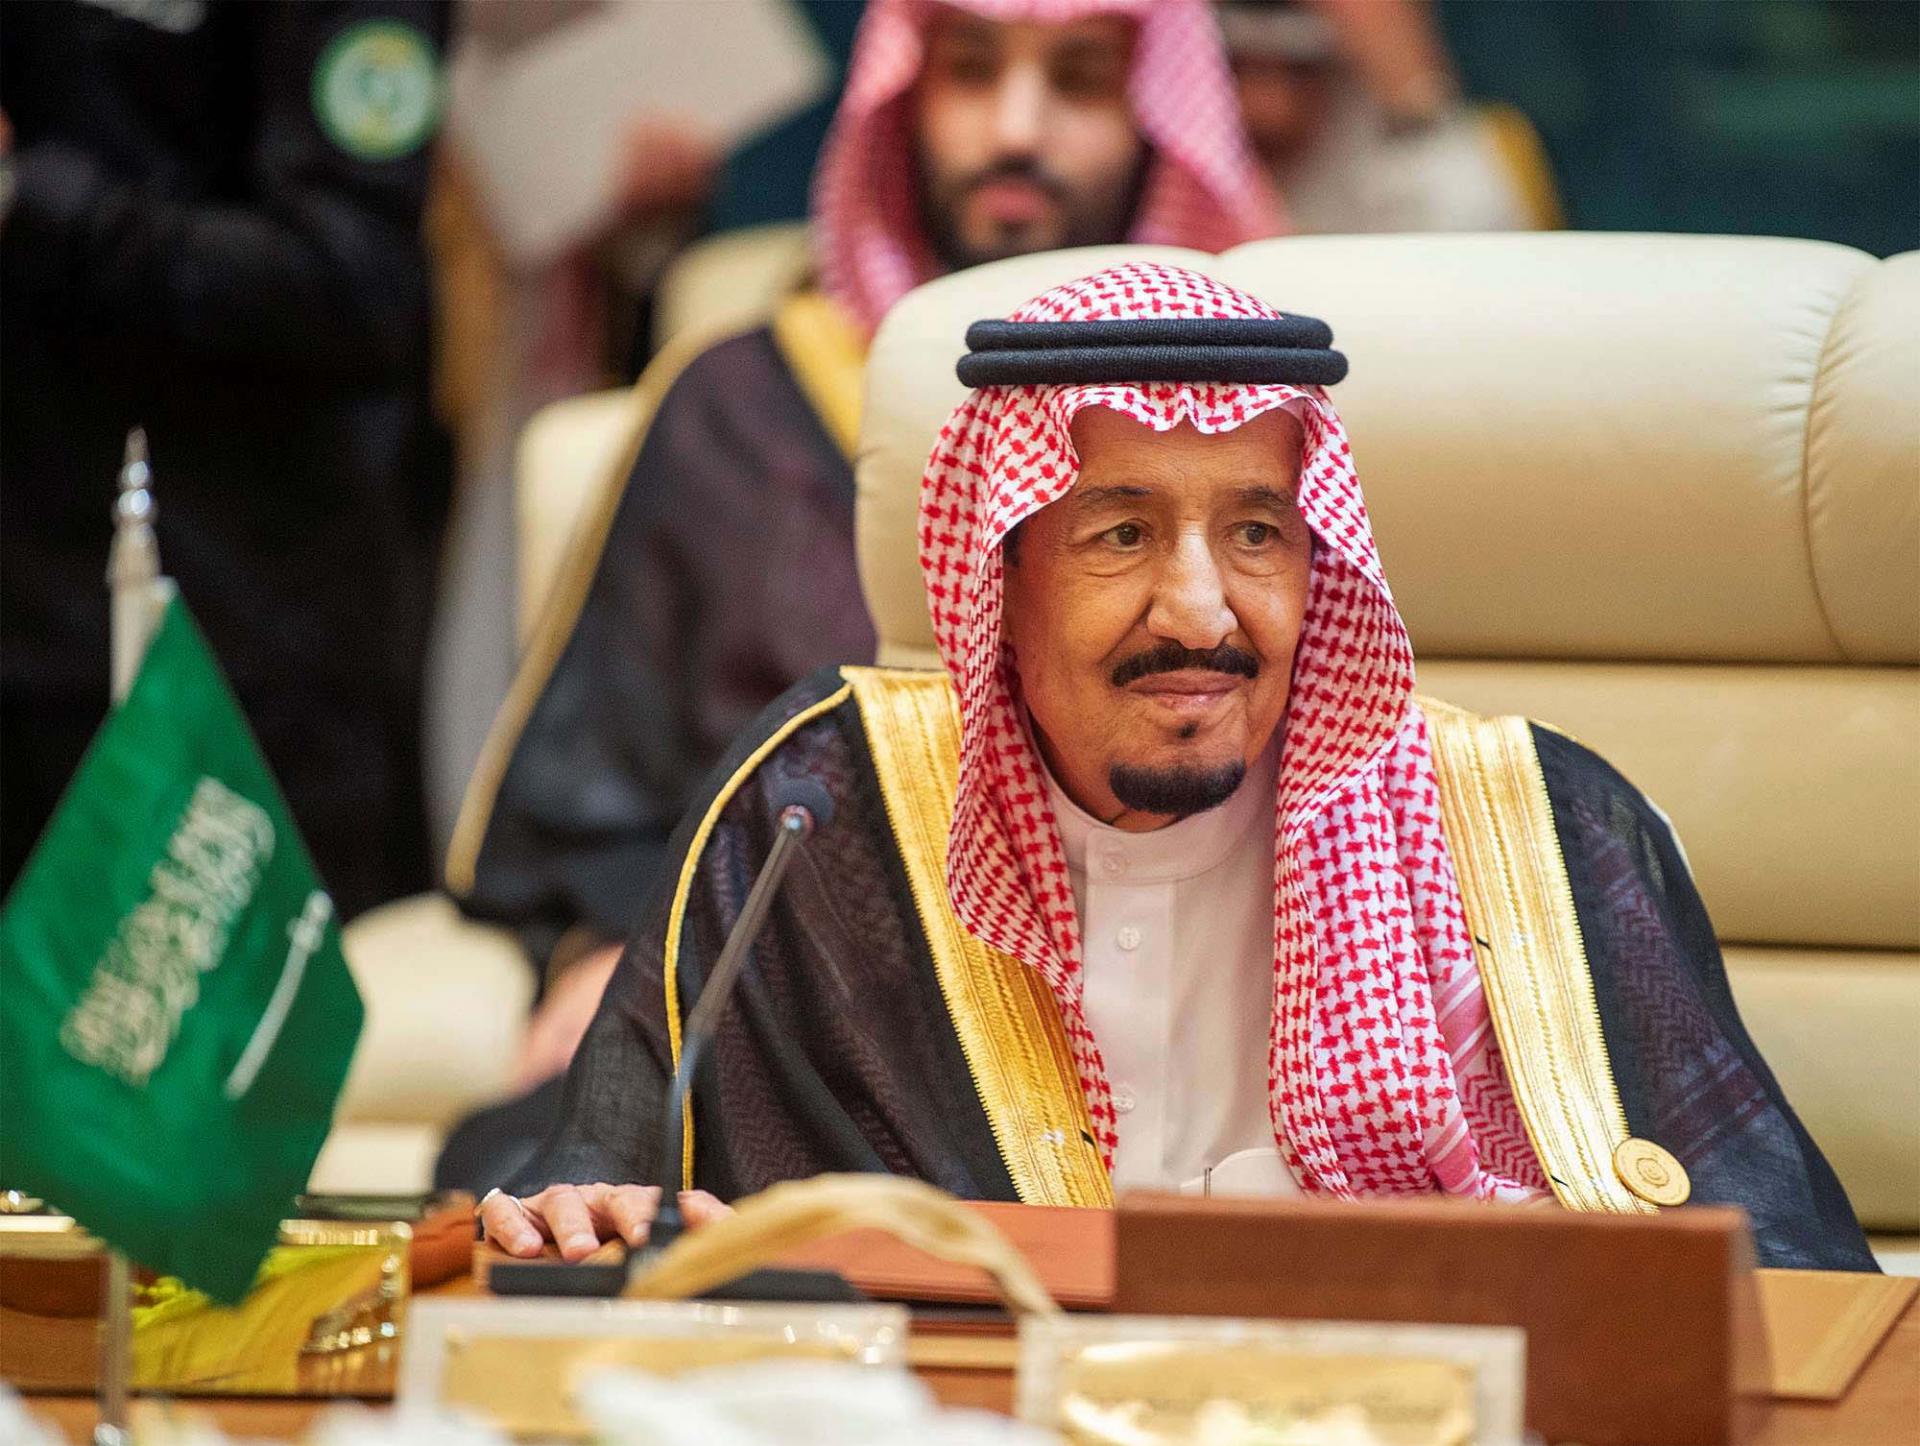 King Salman said his country is keen to preserve the stability and security of the region